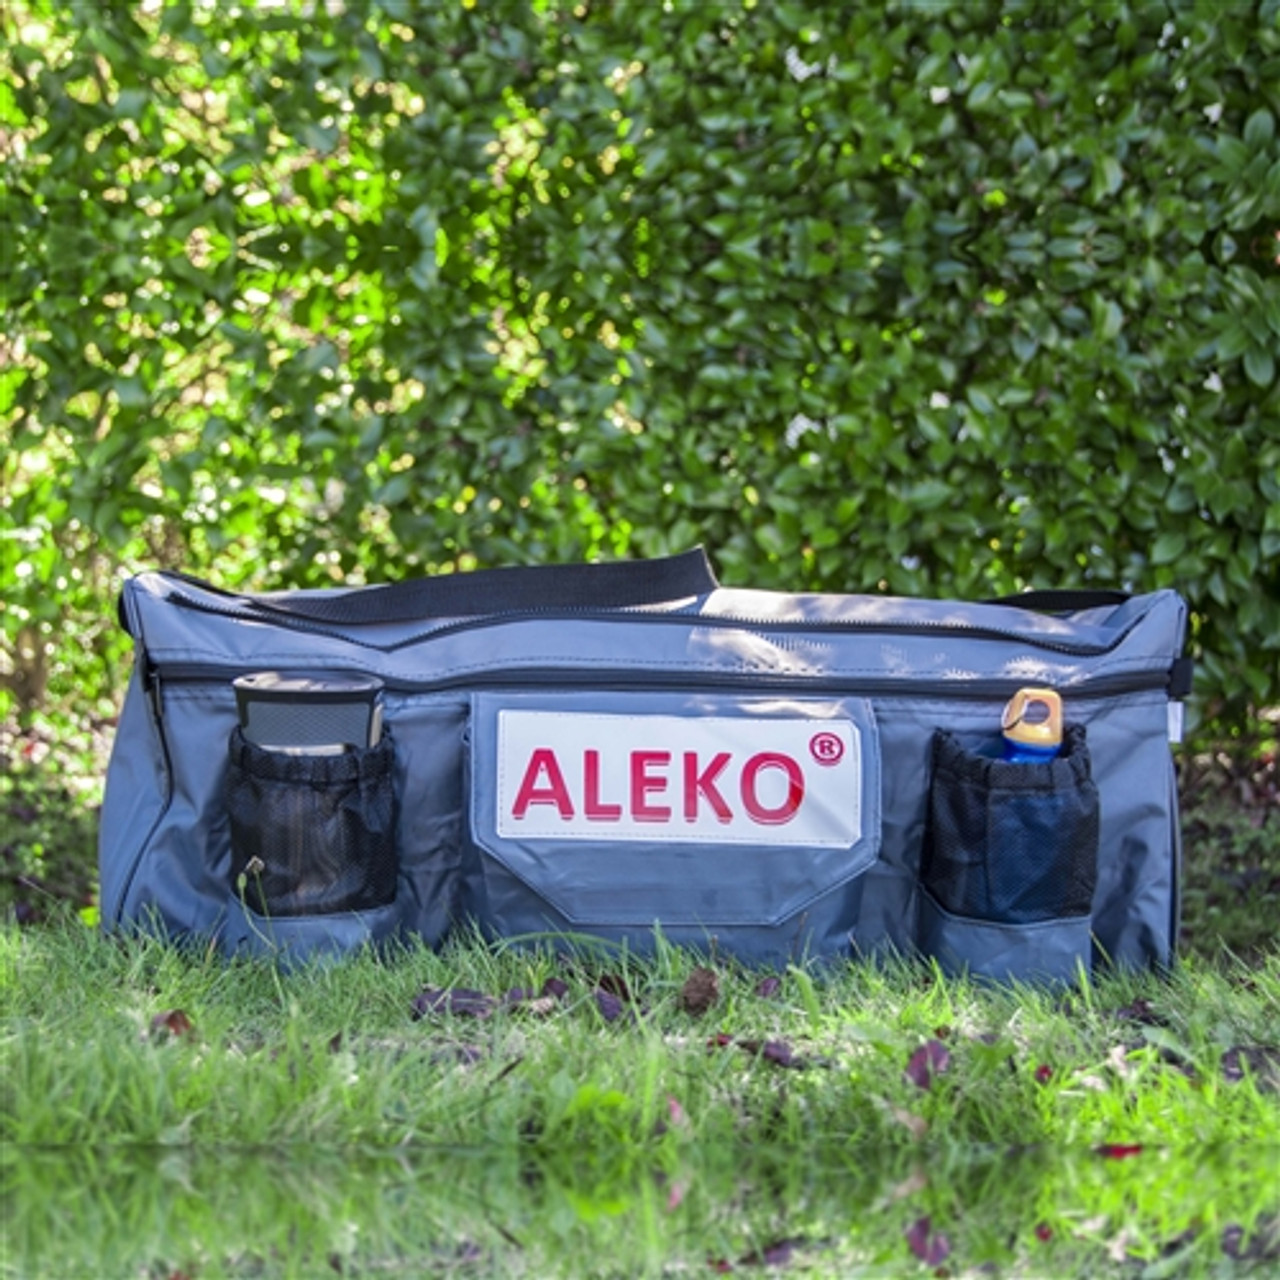 Aleko BSB420GV2-UNB Waterproof Seat Cushion with Spacious Under Seat Bag for Inflatable Boats Gray